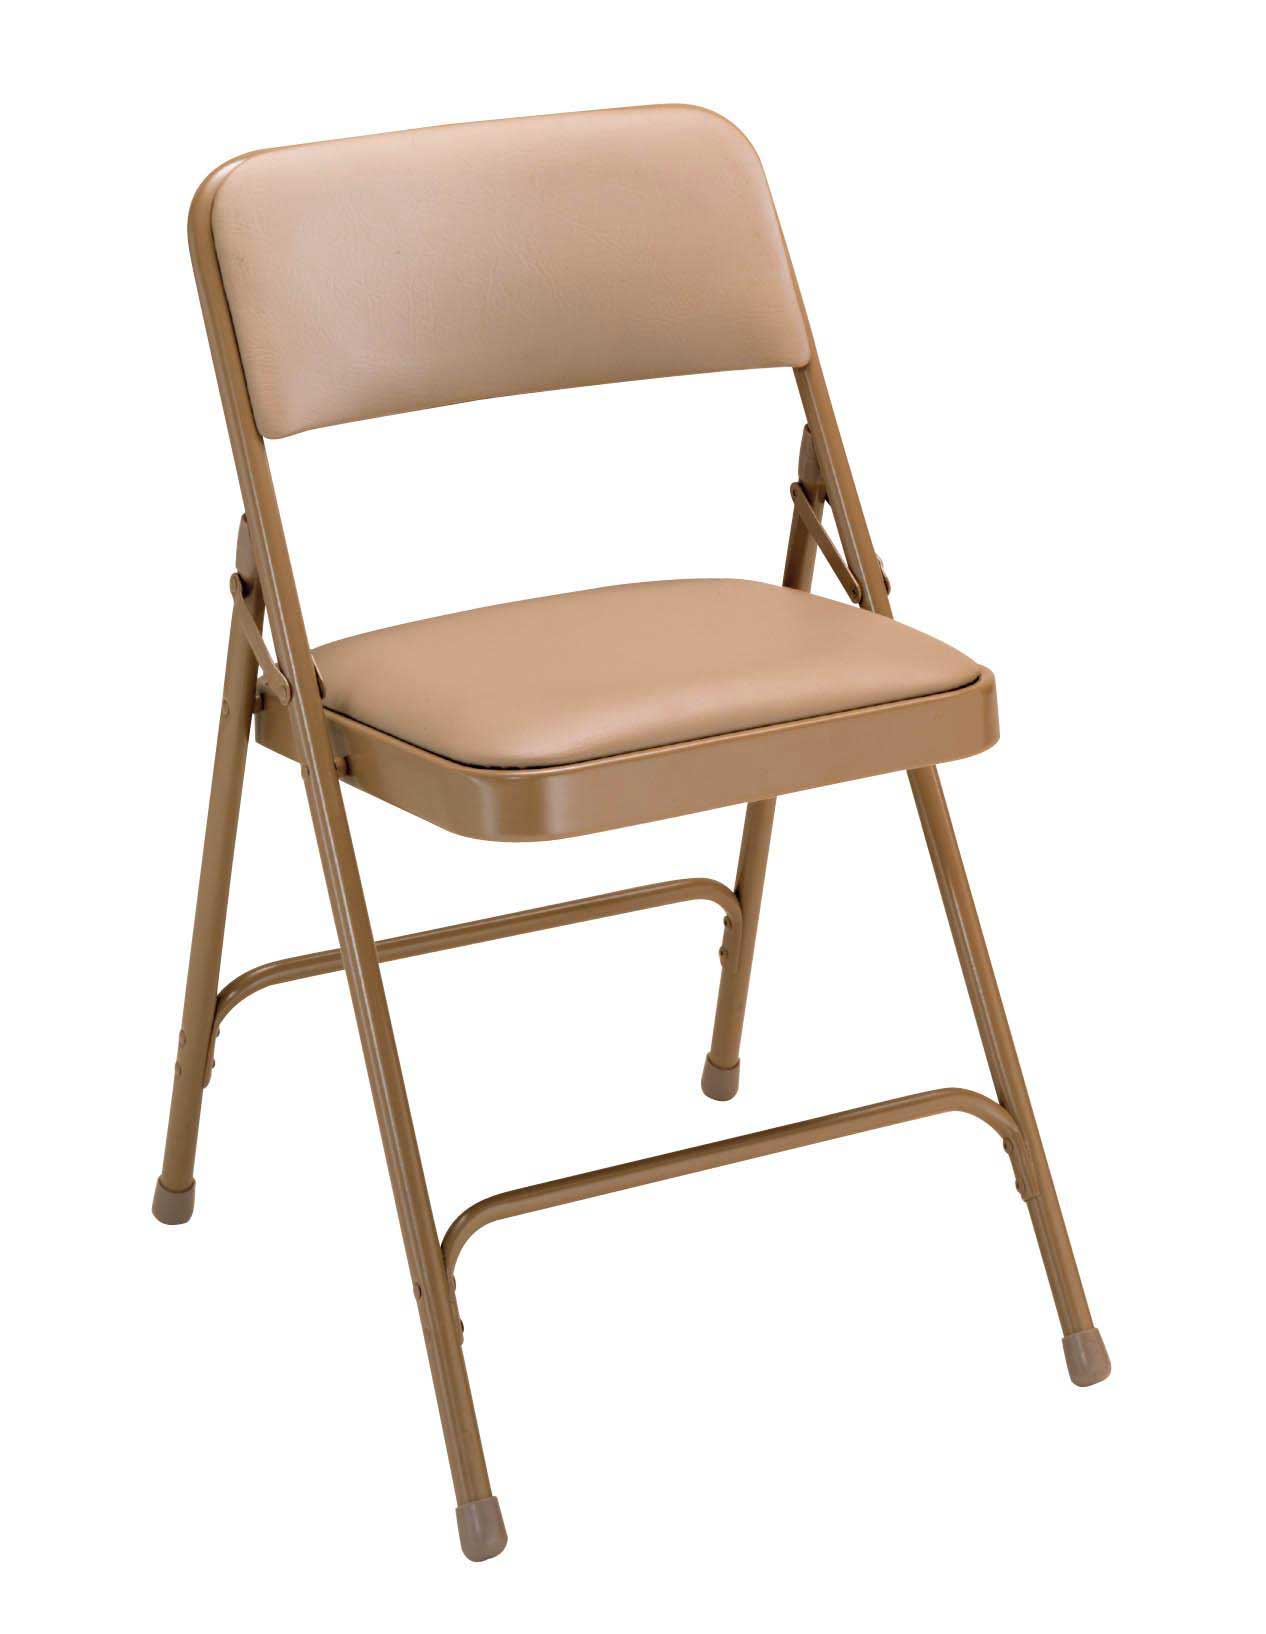 Folding Padded Chairs Style and Design